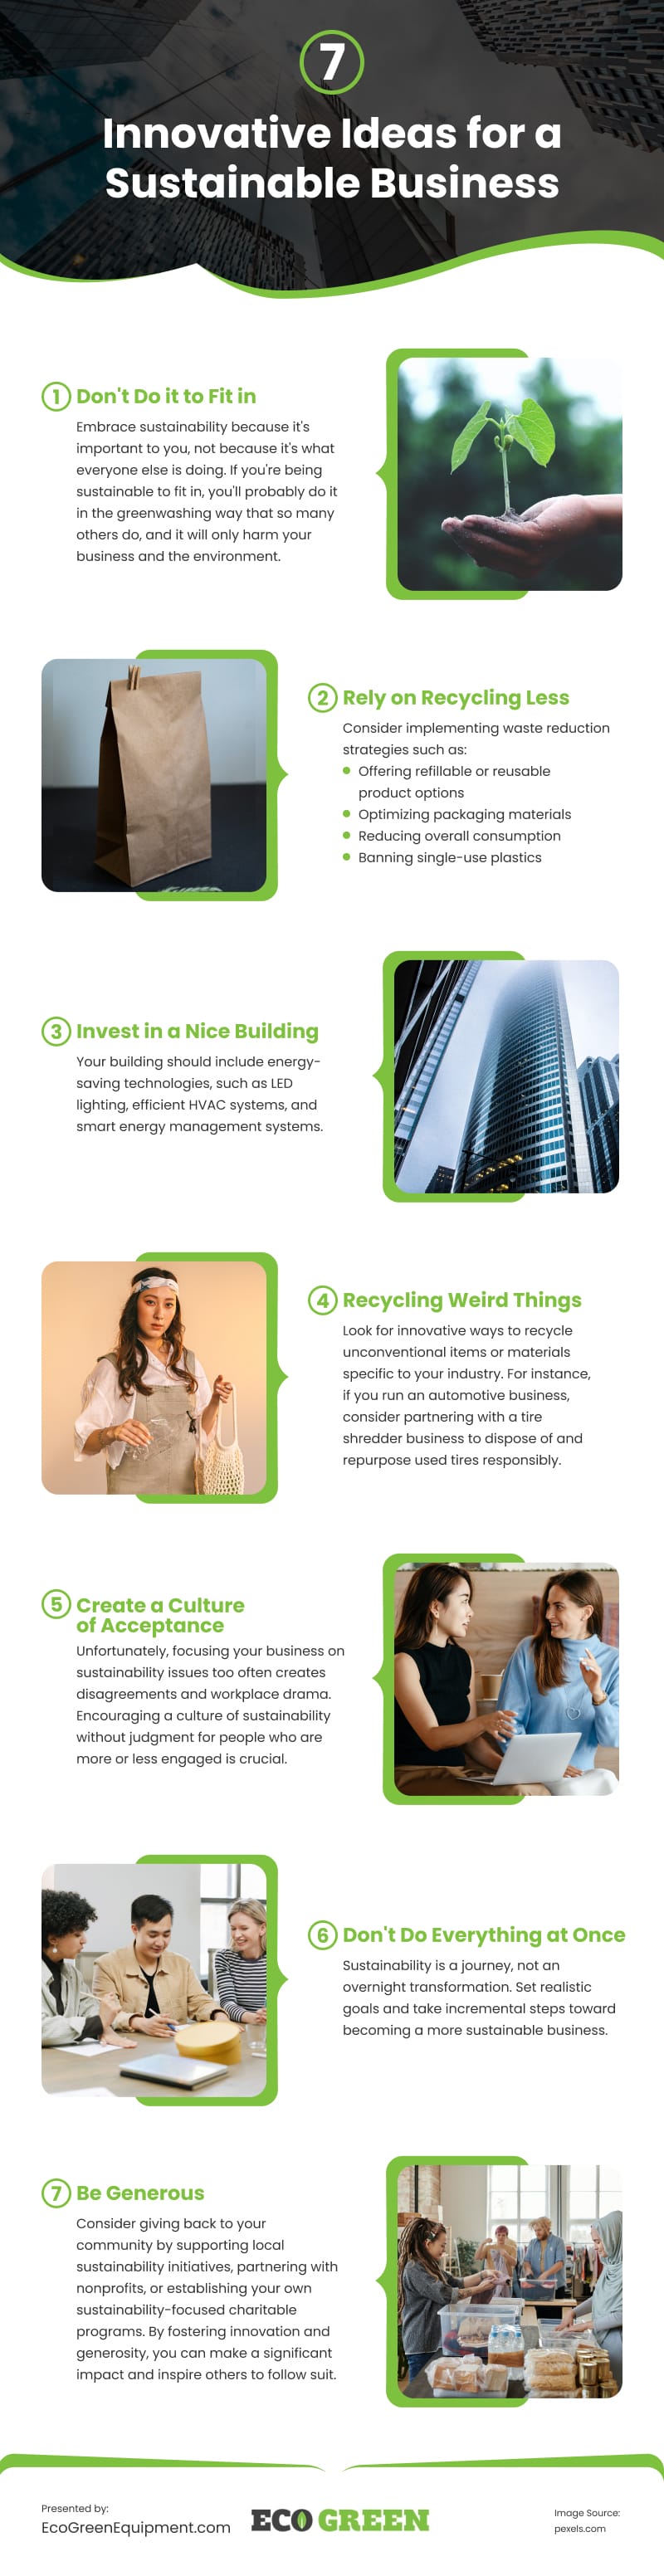 7 Innovative Ideas for a Sustainable Business Infographic